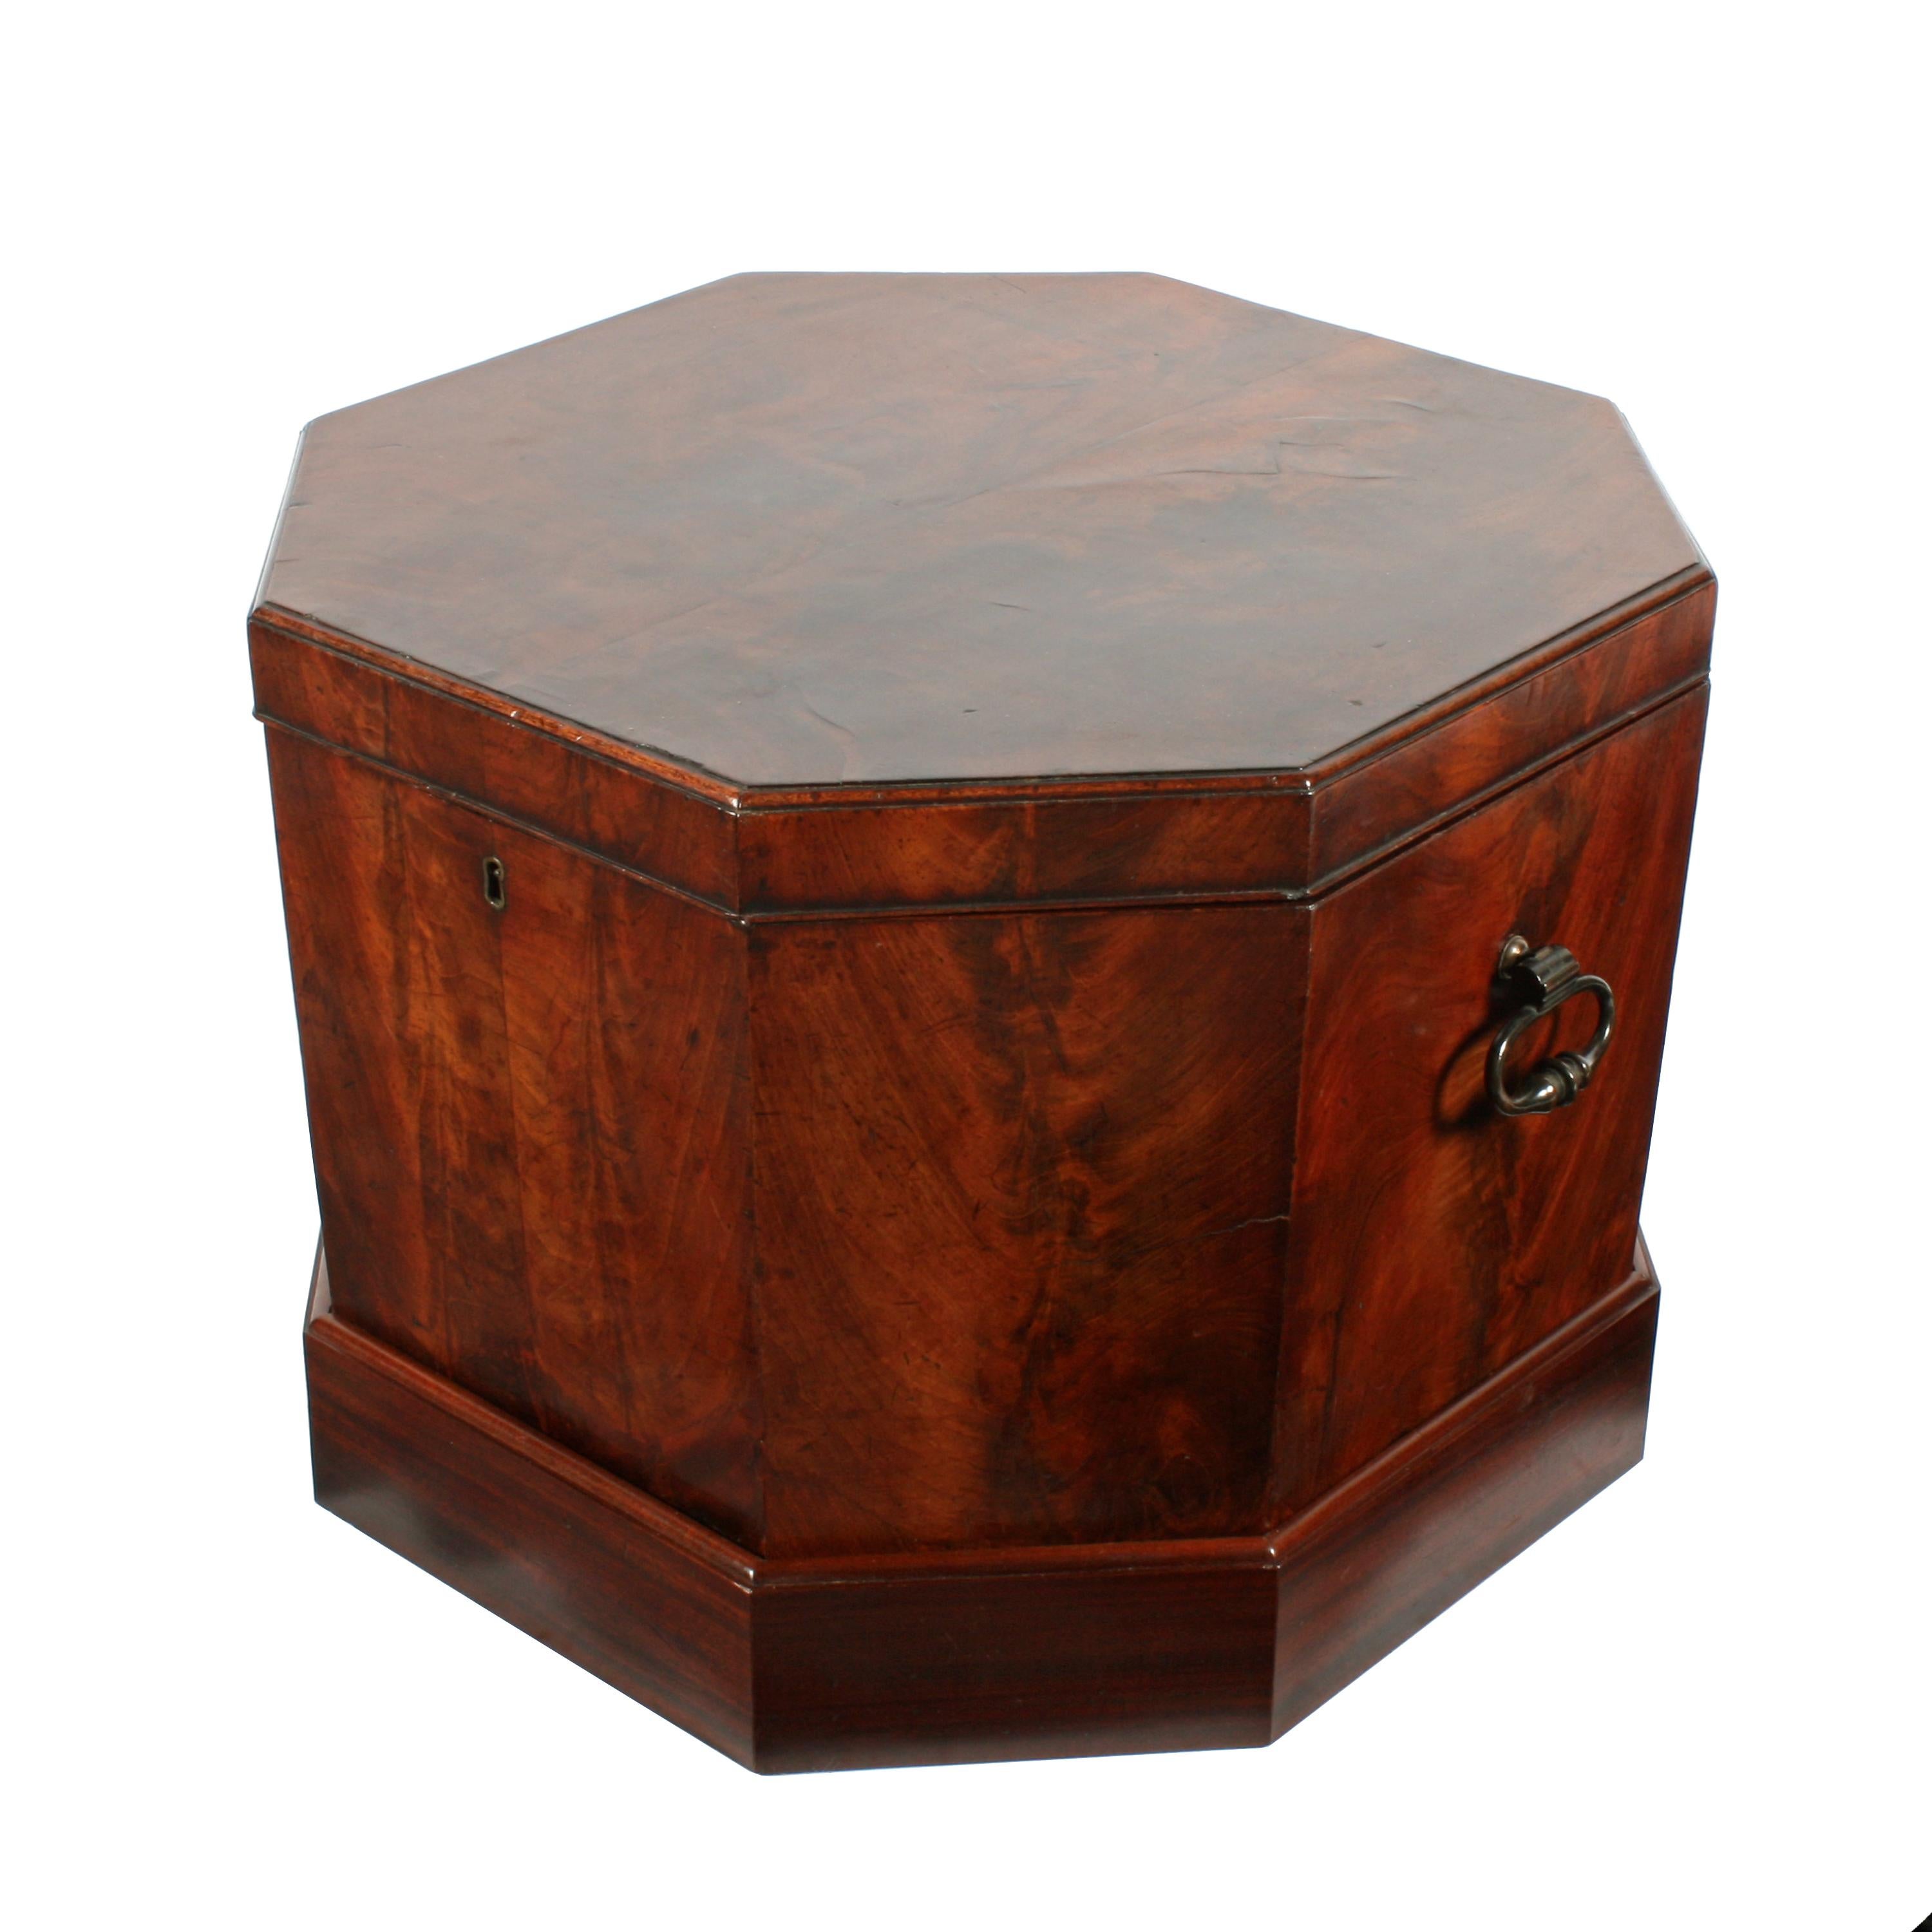 A mid-18th century early George III octagonal mahogany cellaret.

The cellaret is veneered in flamed mahogany, has a pair of original bronze carrying handles and stands on a later plinth base.

The interior has the original mahogany bottle